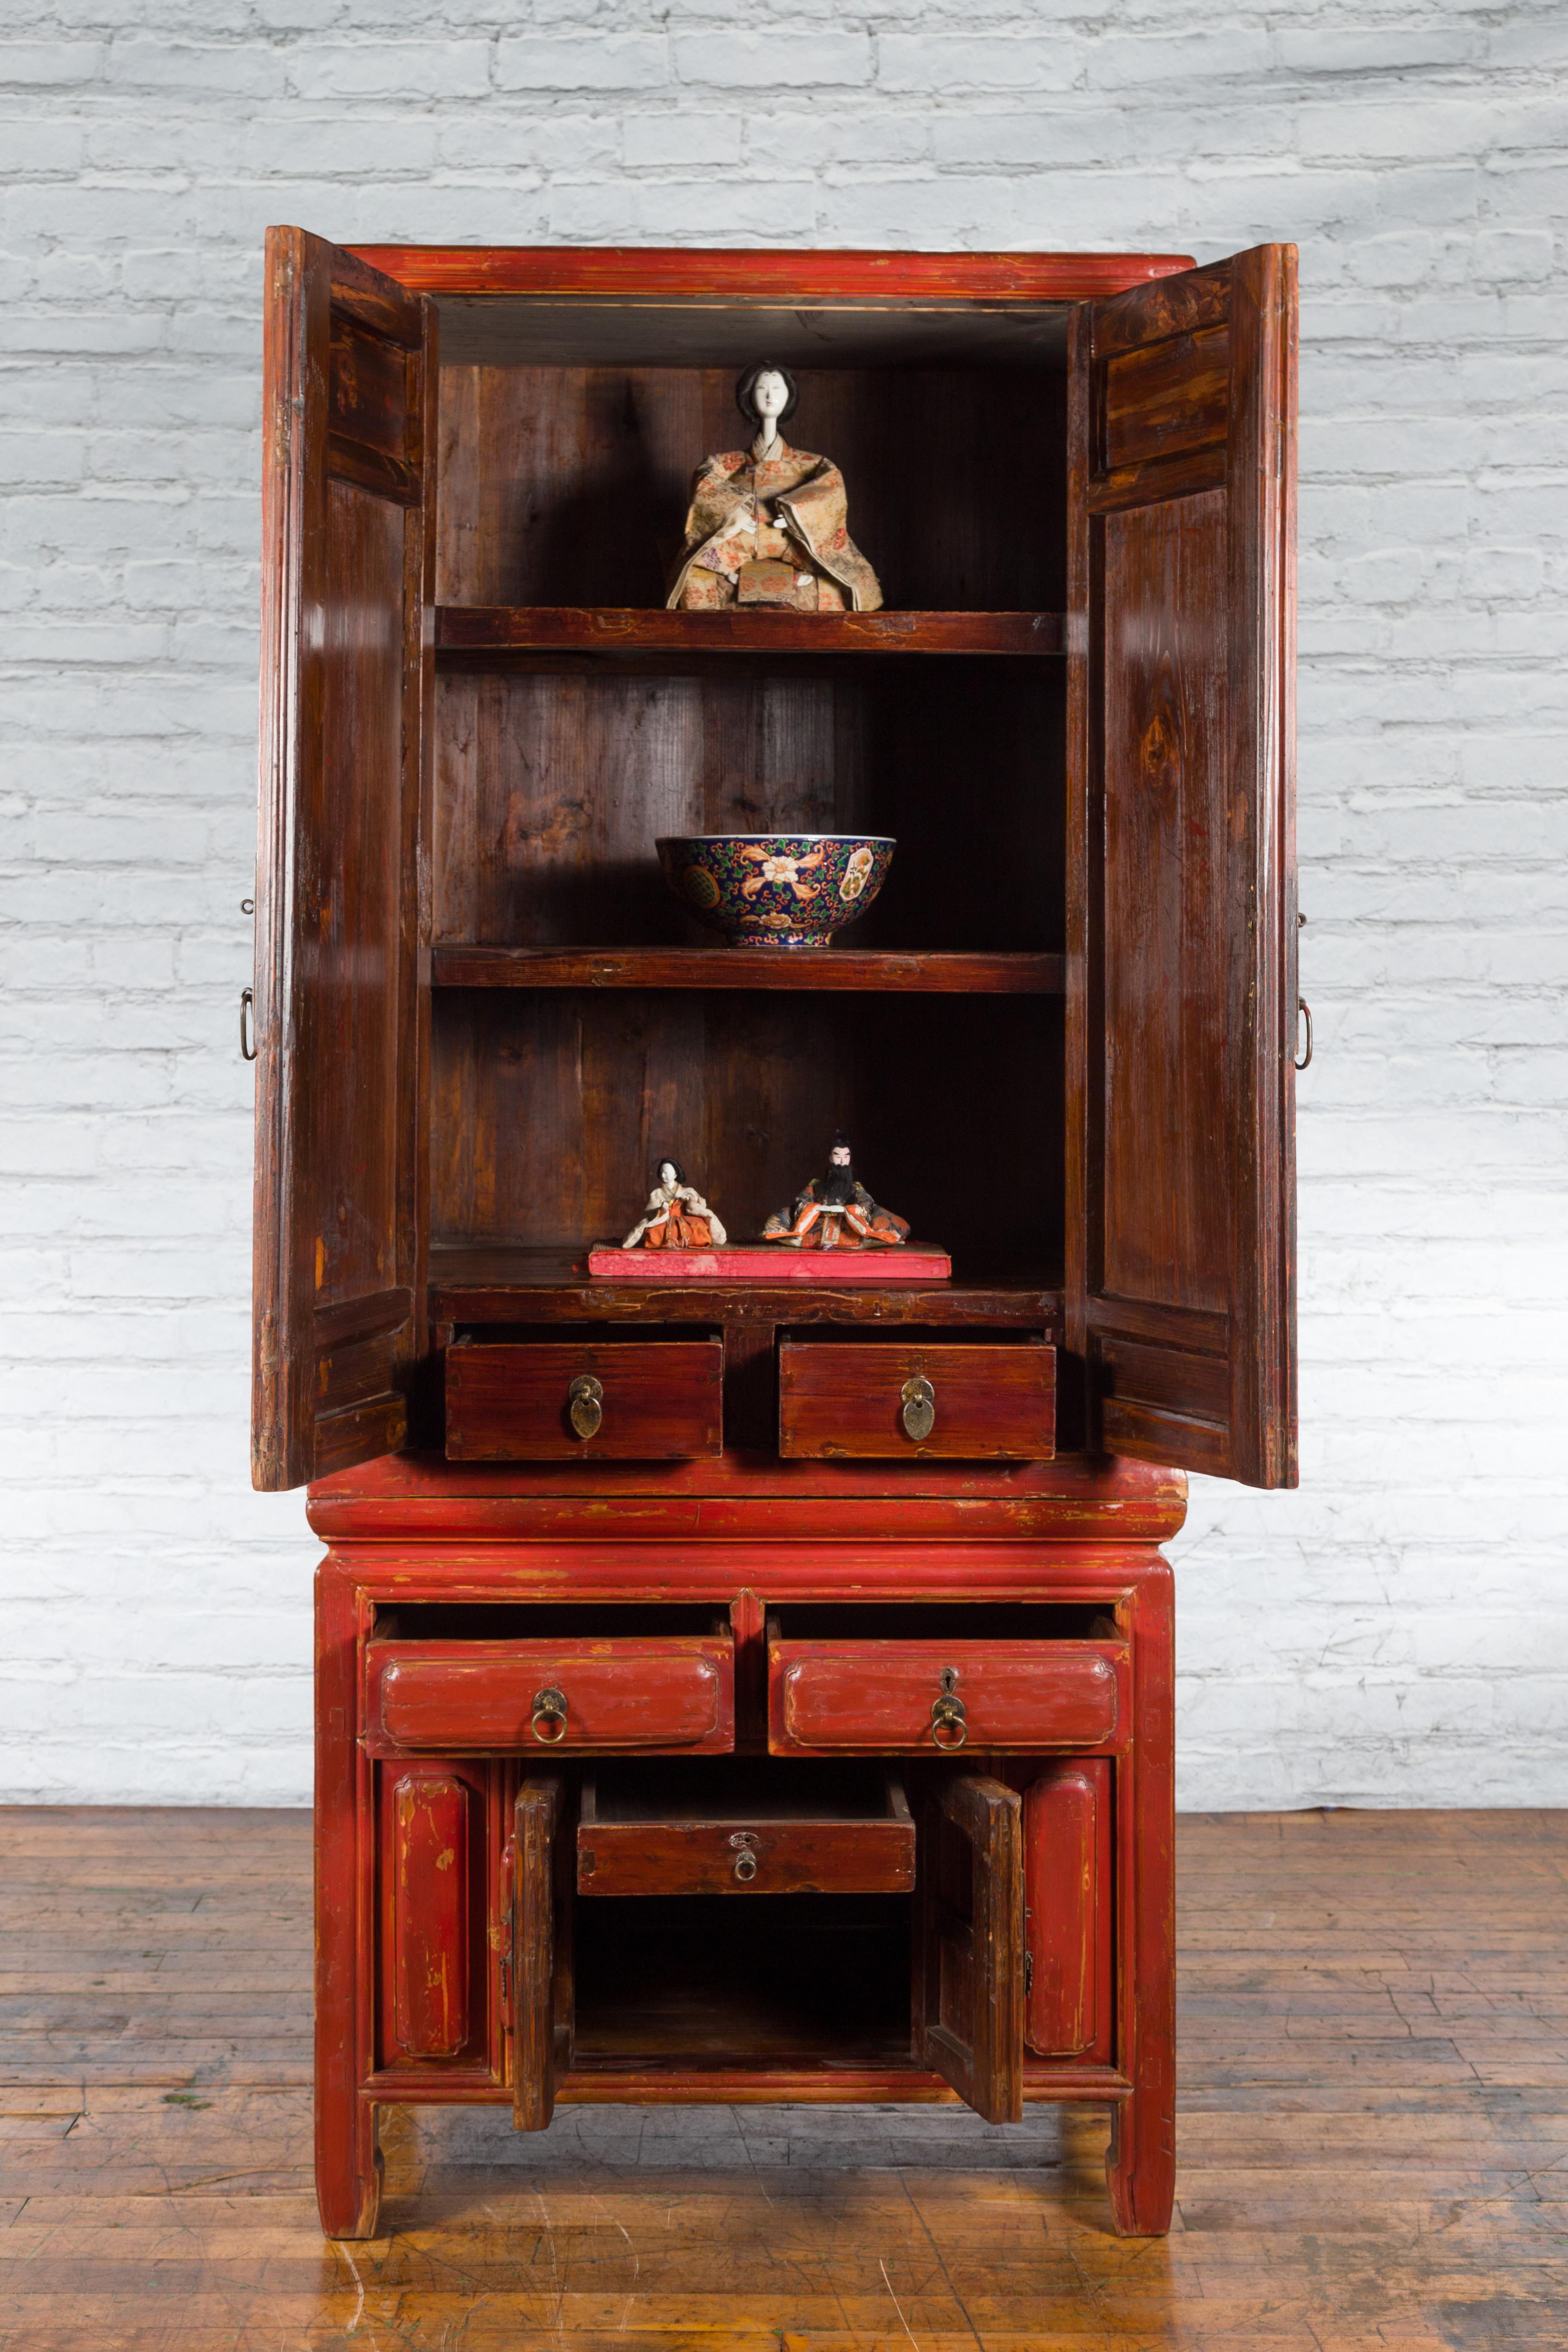 Late Qing Dynasty Period Chinese Red Lacquer Compound Cabinet with Raised Panels In Good Condition For Sale In Yonkers, NY